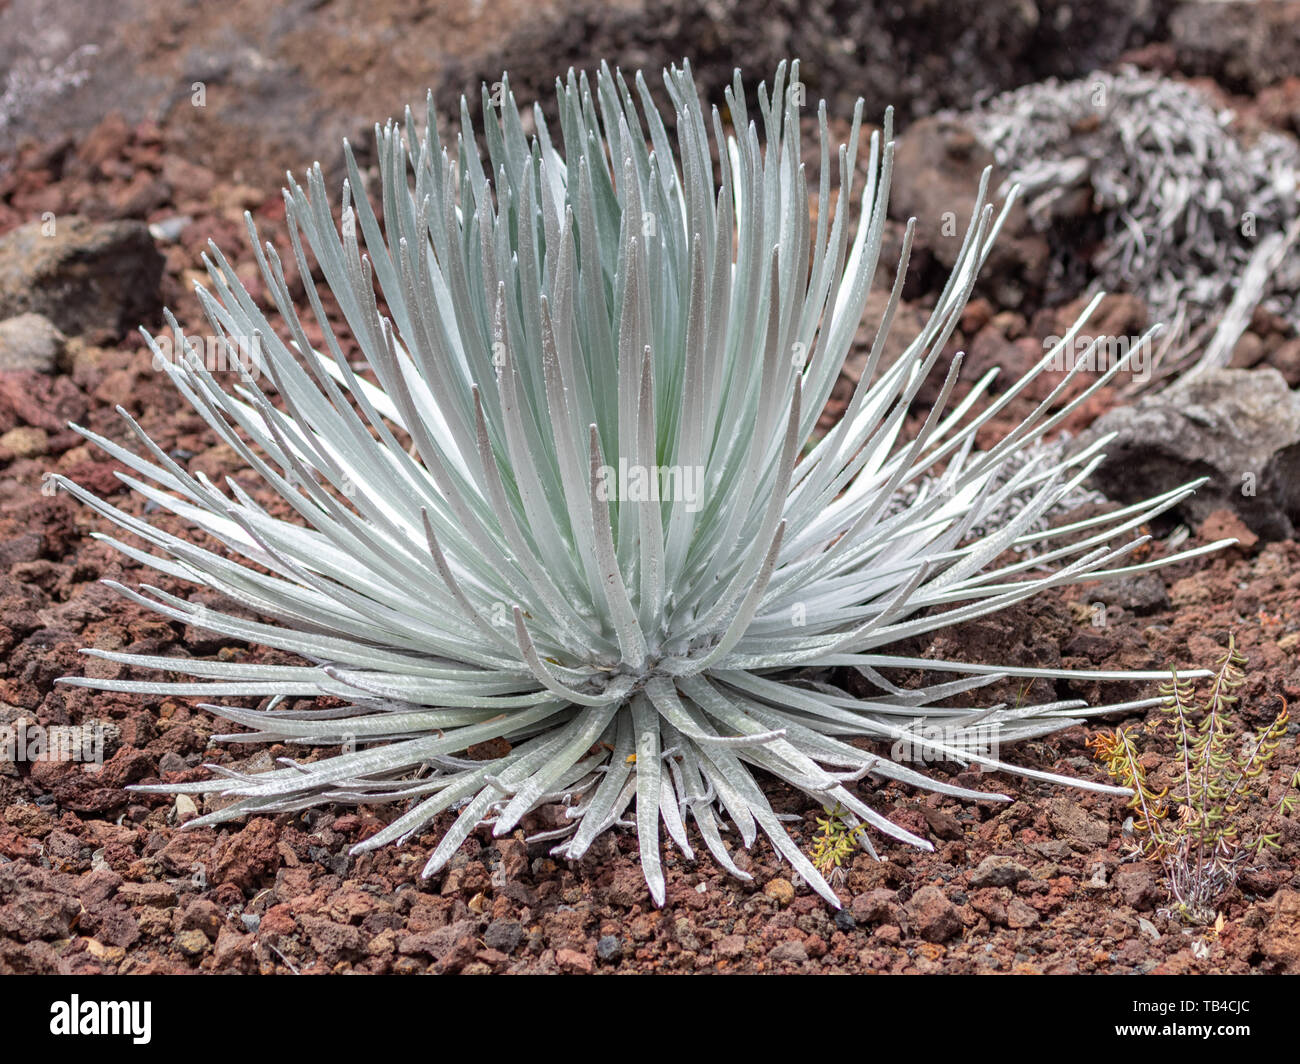 Haleakala silversword, is a very rare plant, part of the daisy family Asteraceae. It takes decades to bloom and then dies after blooming. Stock Photo